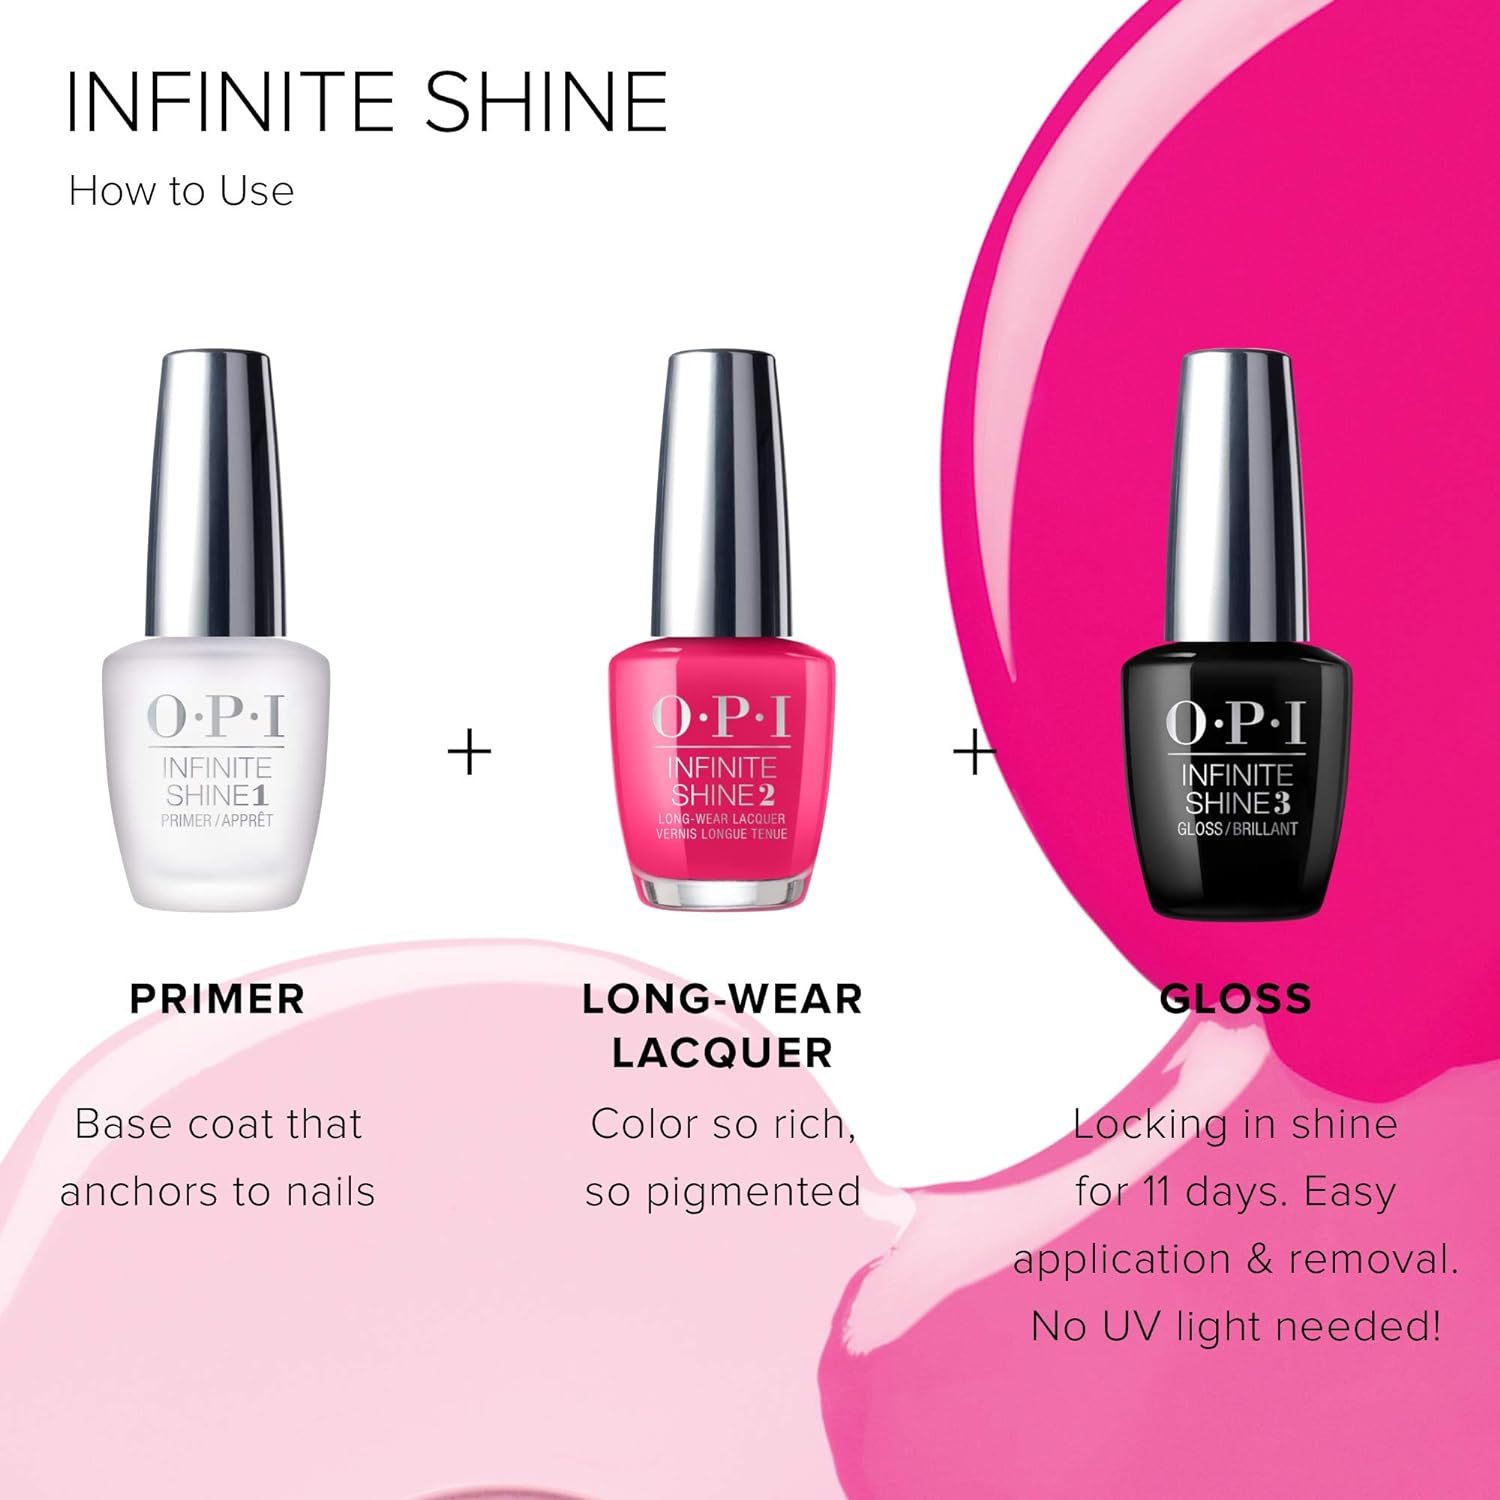 OPI Infinite Shine 2 Long-Wear Lacquer, All Your Dreams In Vending Machines, Pink Long-Lasting Nail Polish, Tokyo Collection, 0.5 Fl Oz